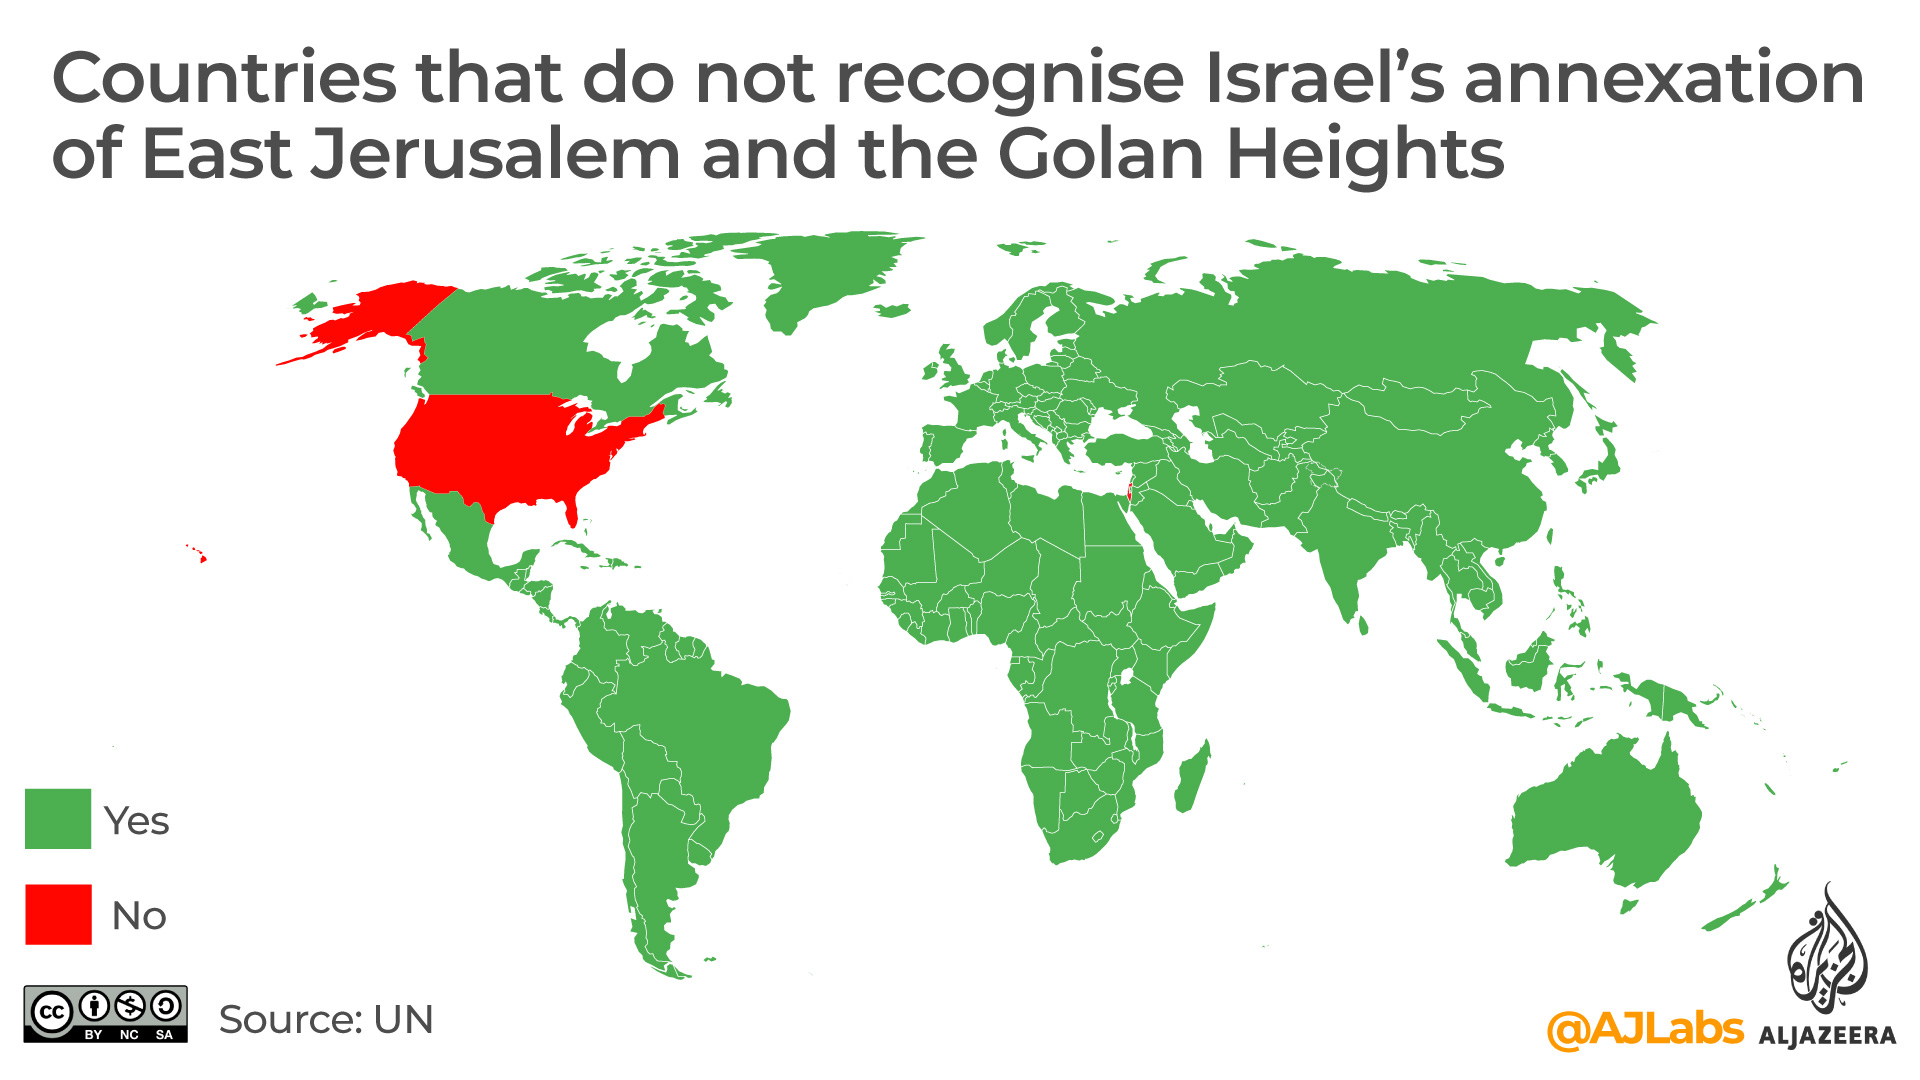 Annexation of East Jerusalem and the Golan Heights